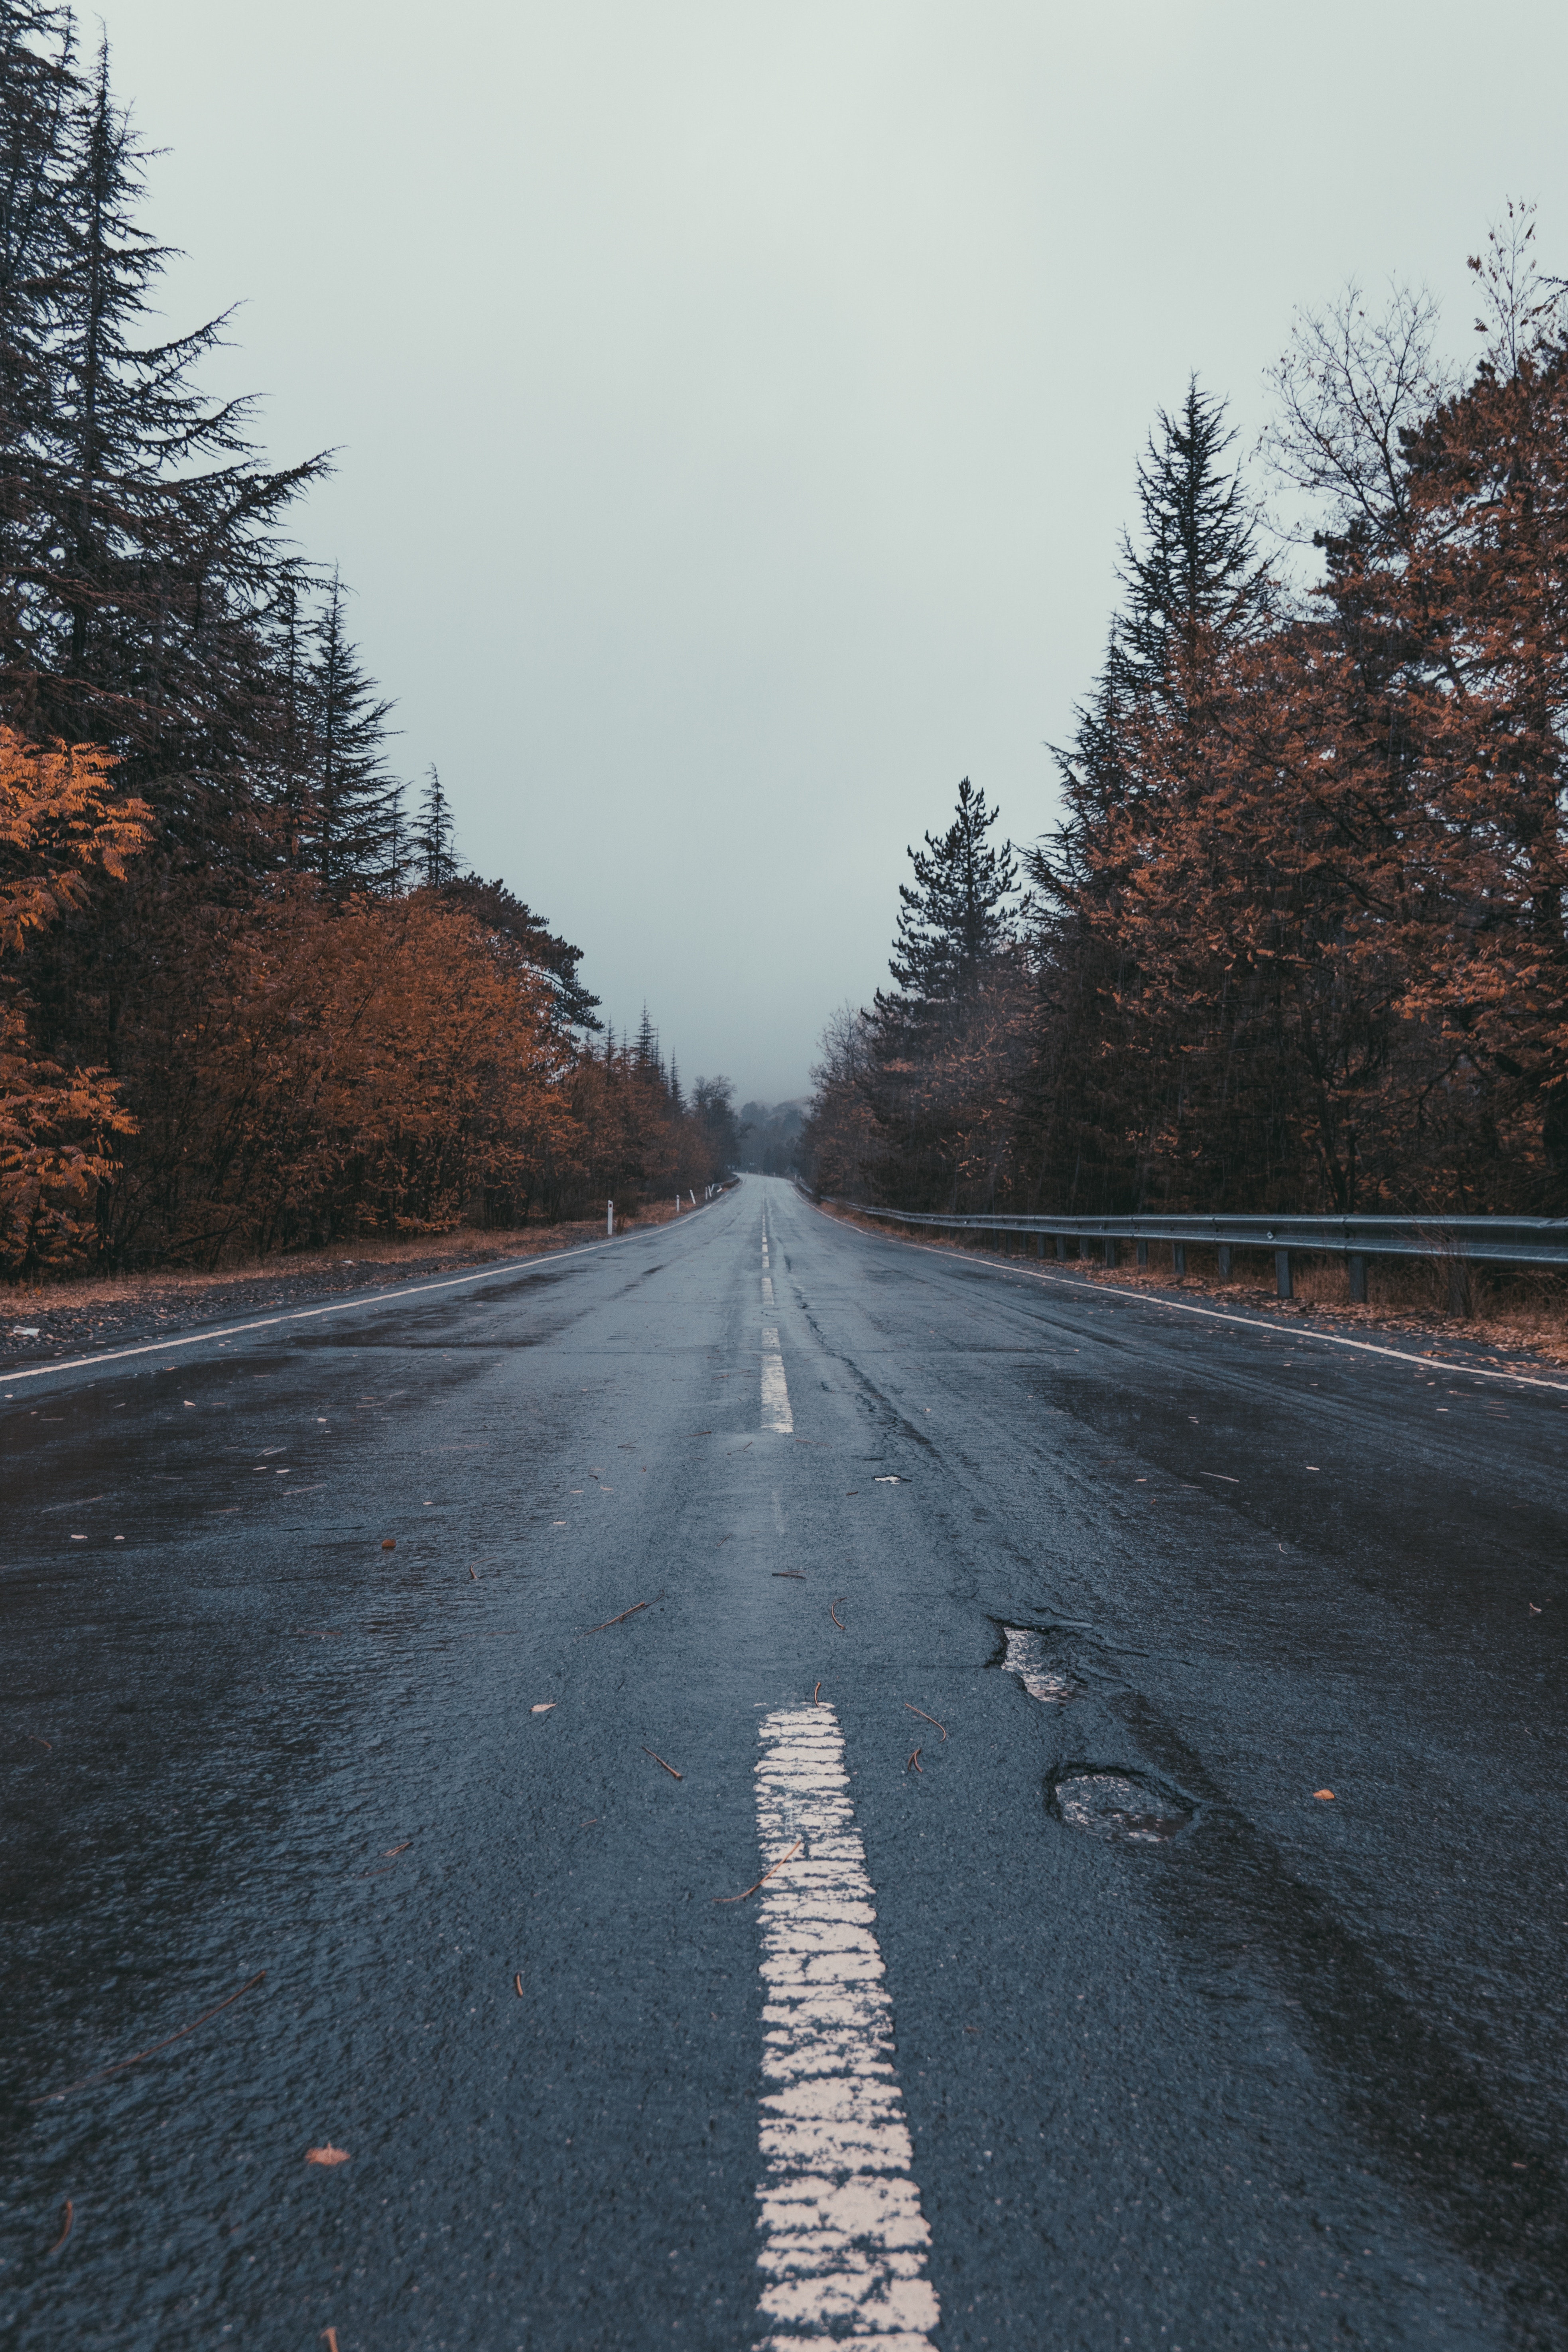 mainly cloudy, nature, trees, road, markup, overcast QHD